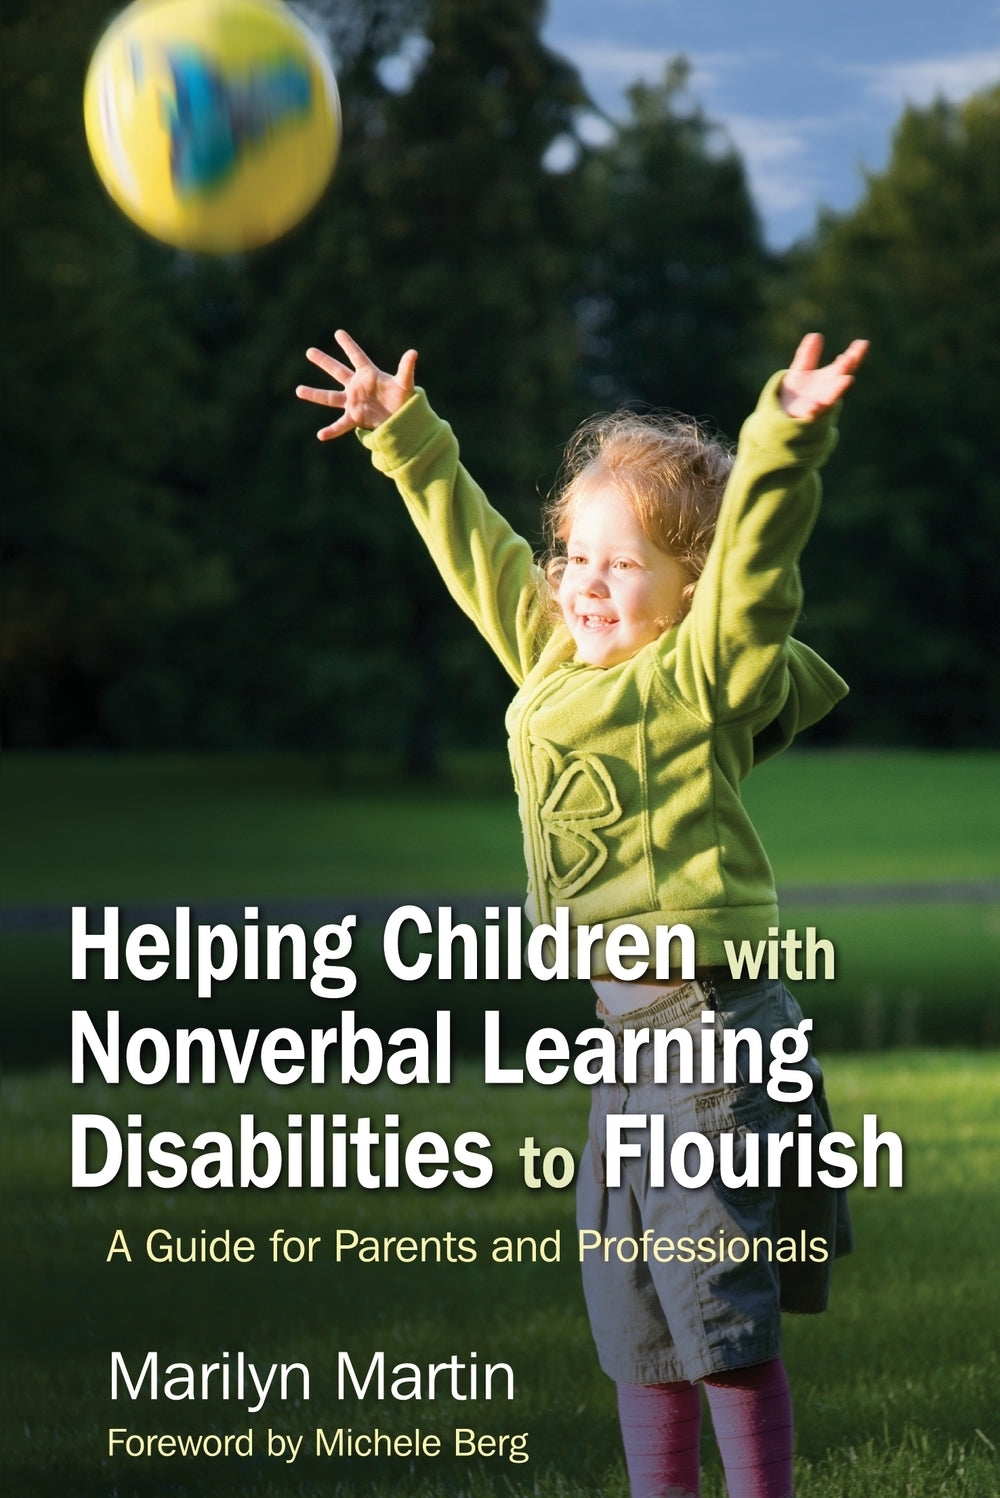 Helping Children with Nonverbal Learning Disabilities to Flourish by Marilyn Martin Zion